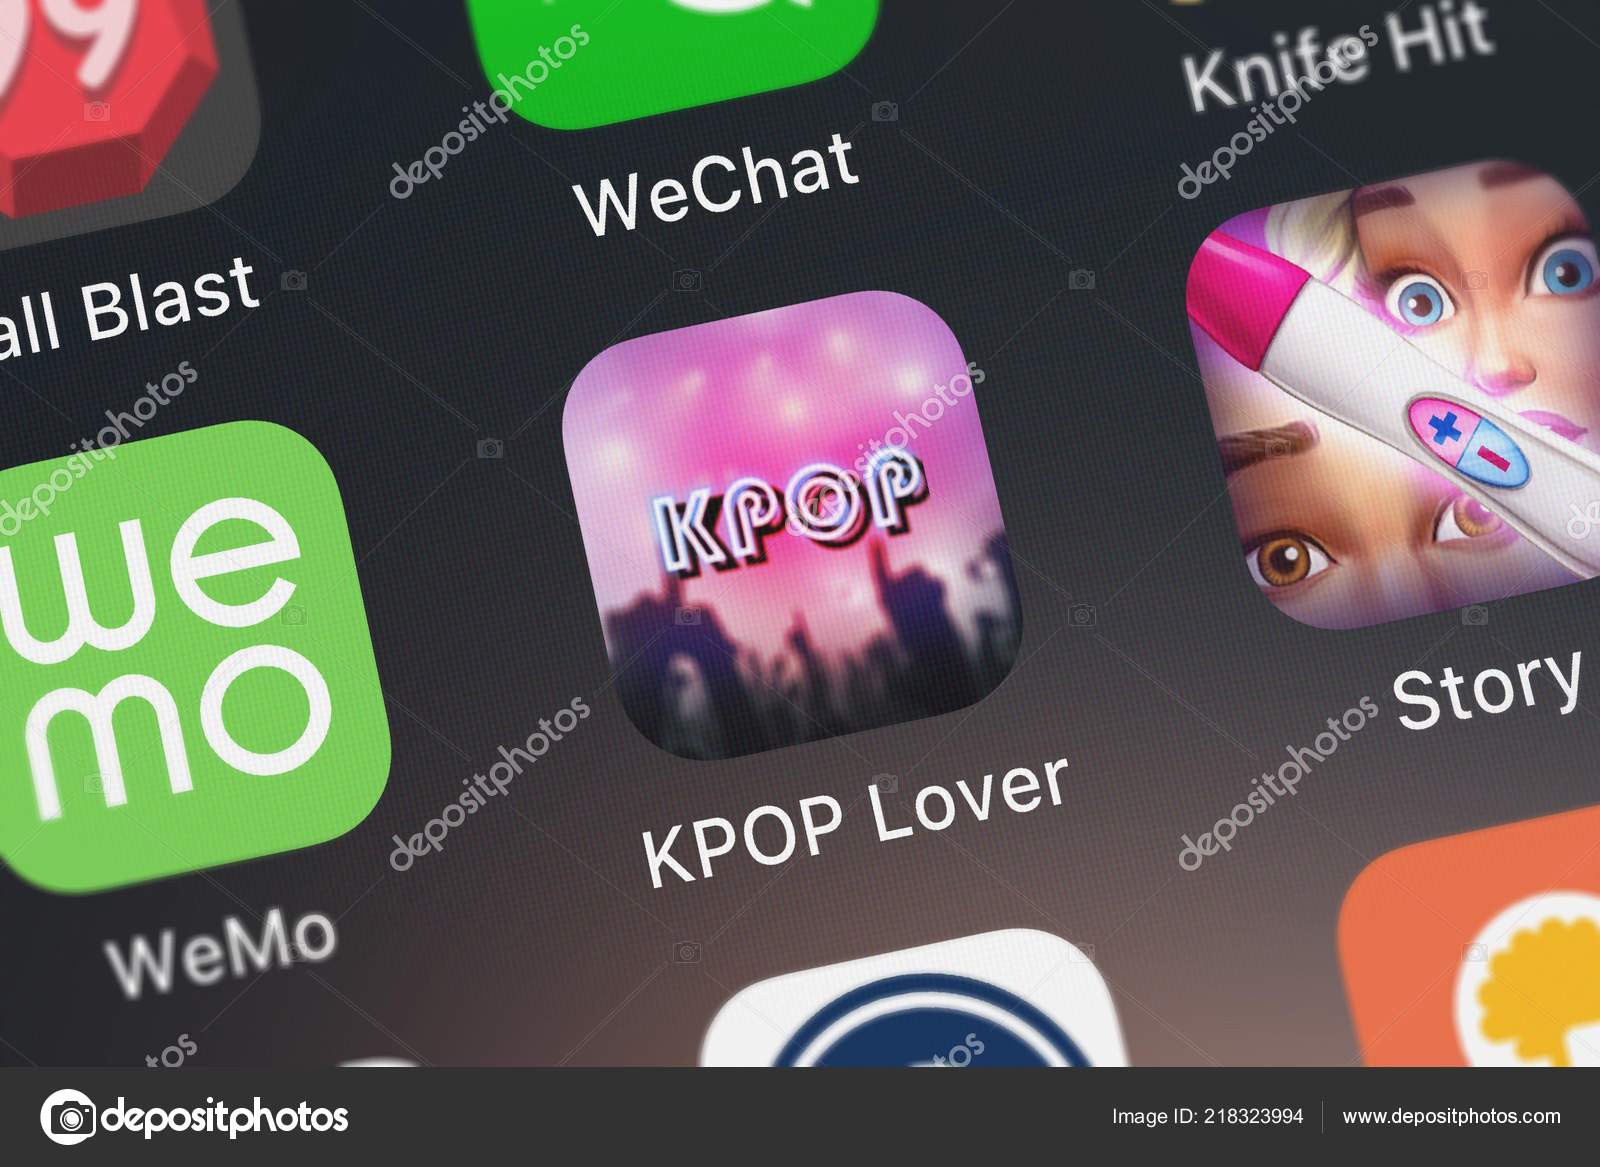 669 Kpop Stock Photos Images Download Kpop Pictures On Depositphotos